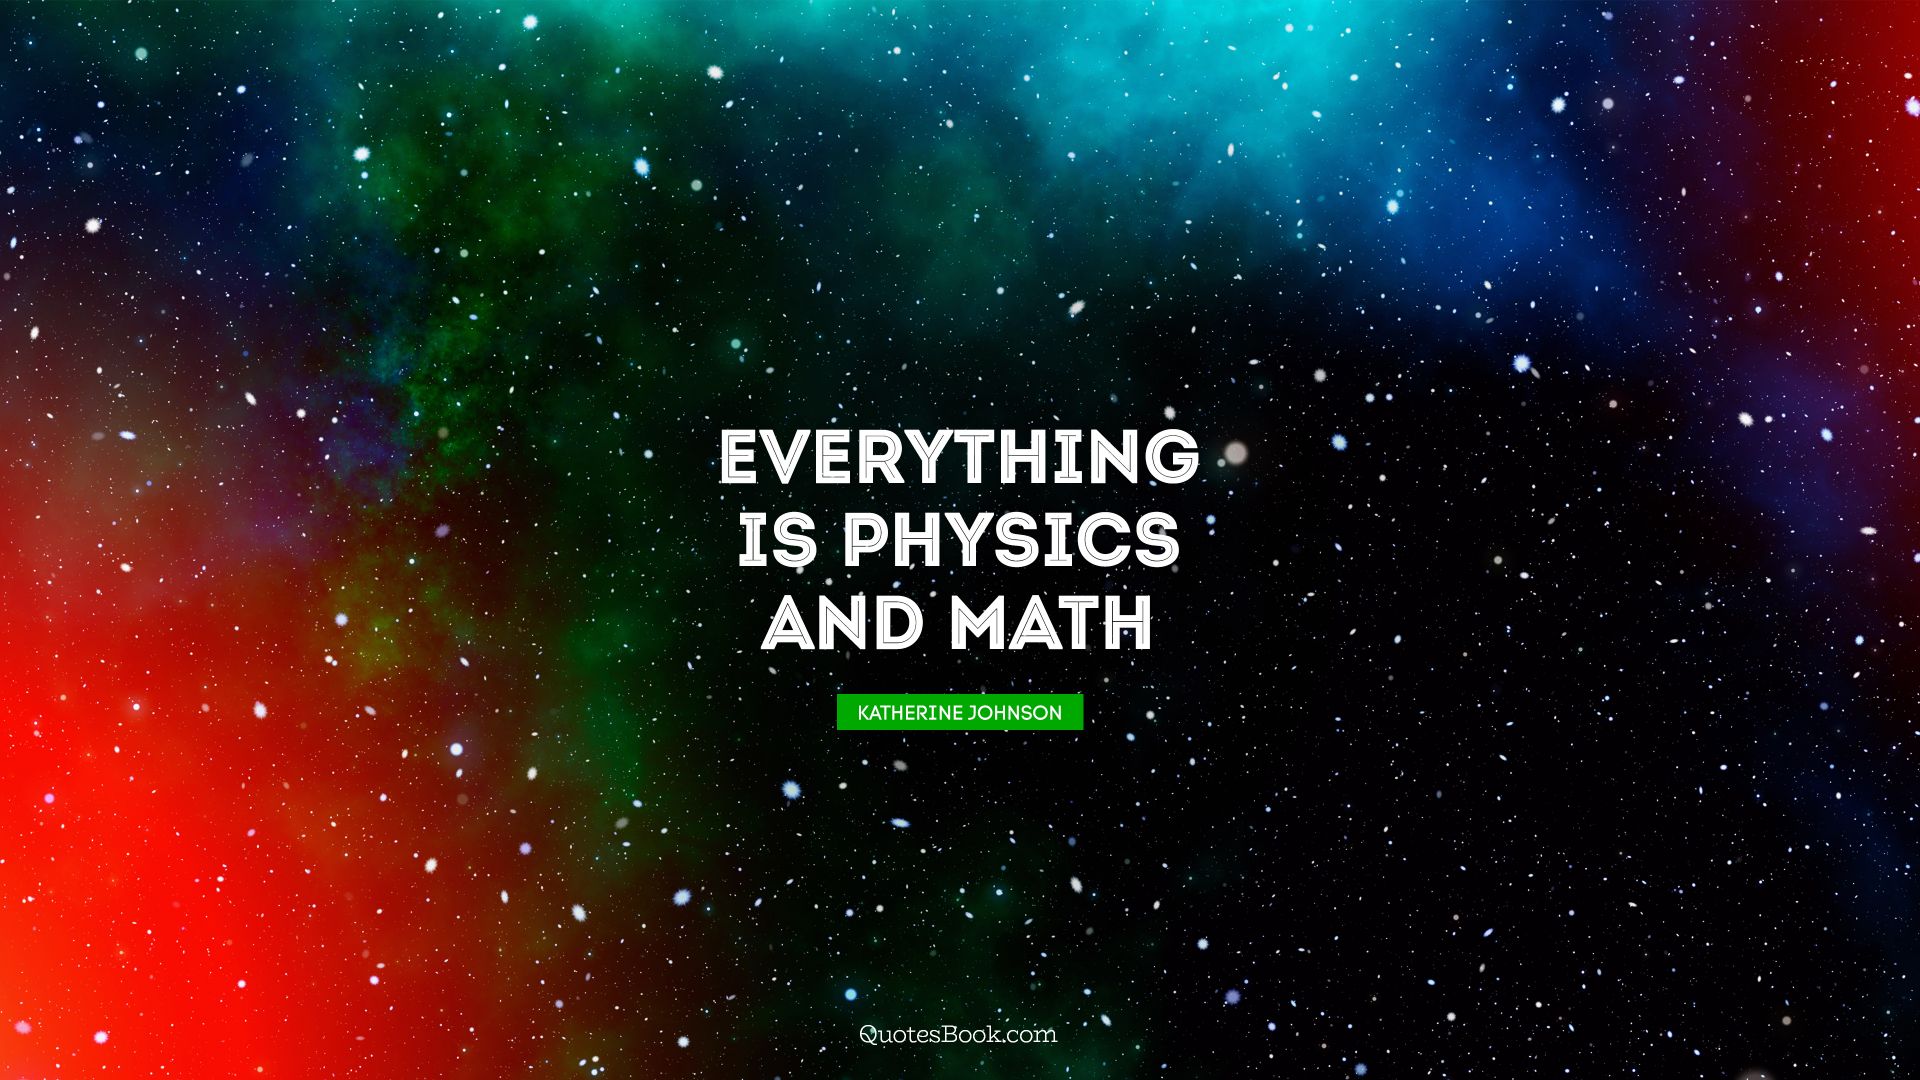 Everything Is Physics And Math - Math Katherine Johnson Quotes - 1920x1080  Wallpaper 